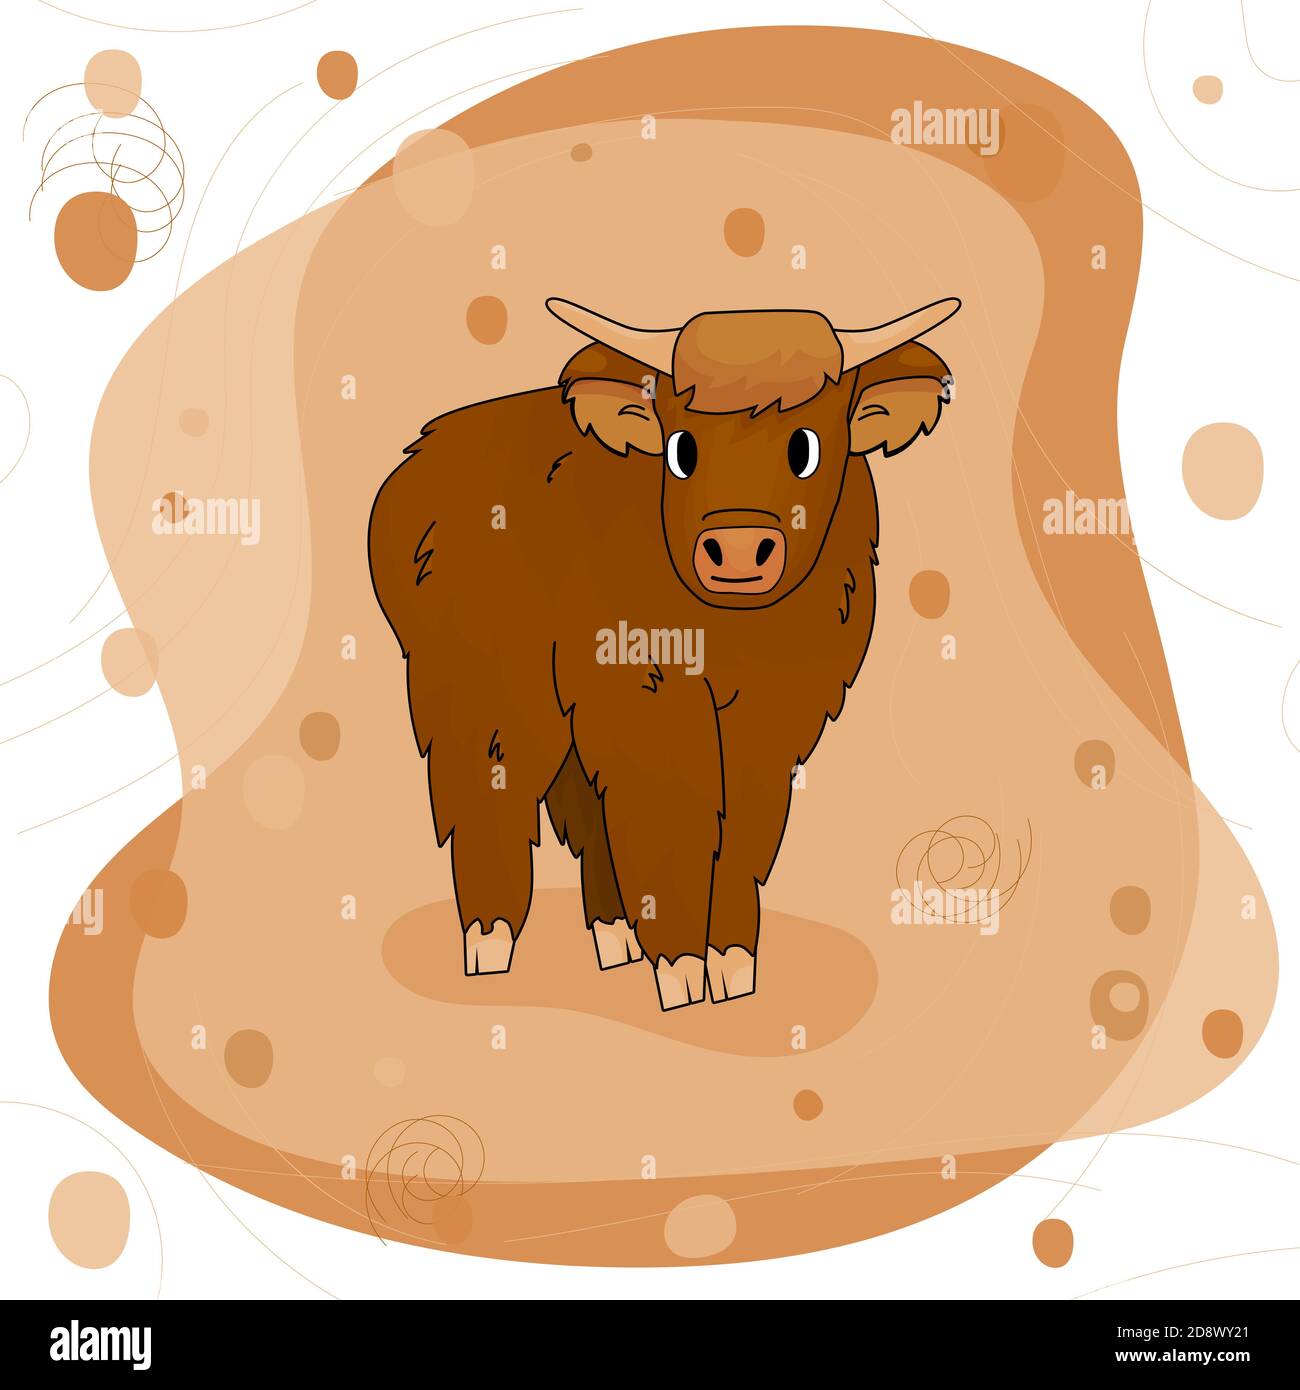 Cute Cartoon Bull high land cow is standing on the ground on pink and brown background. Isolated character with bangs Stock Vector